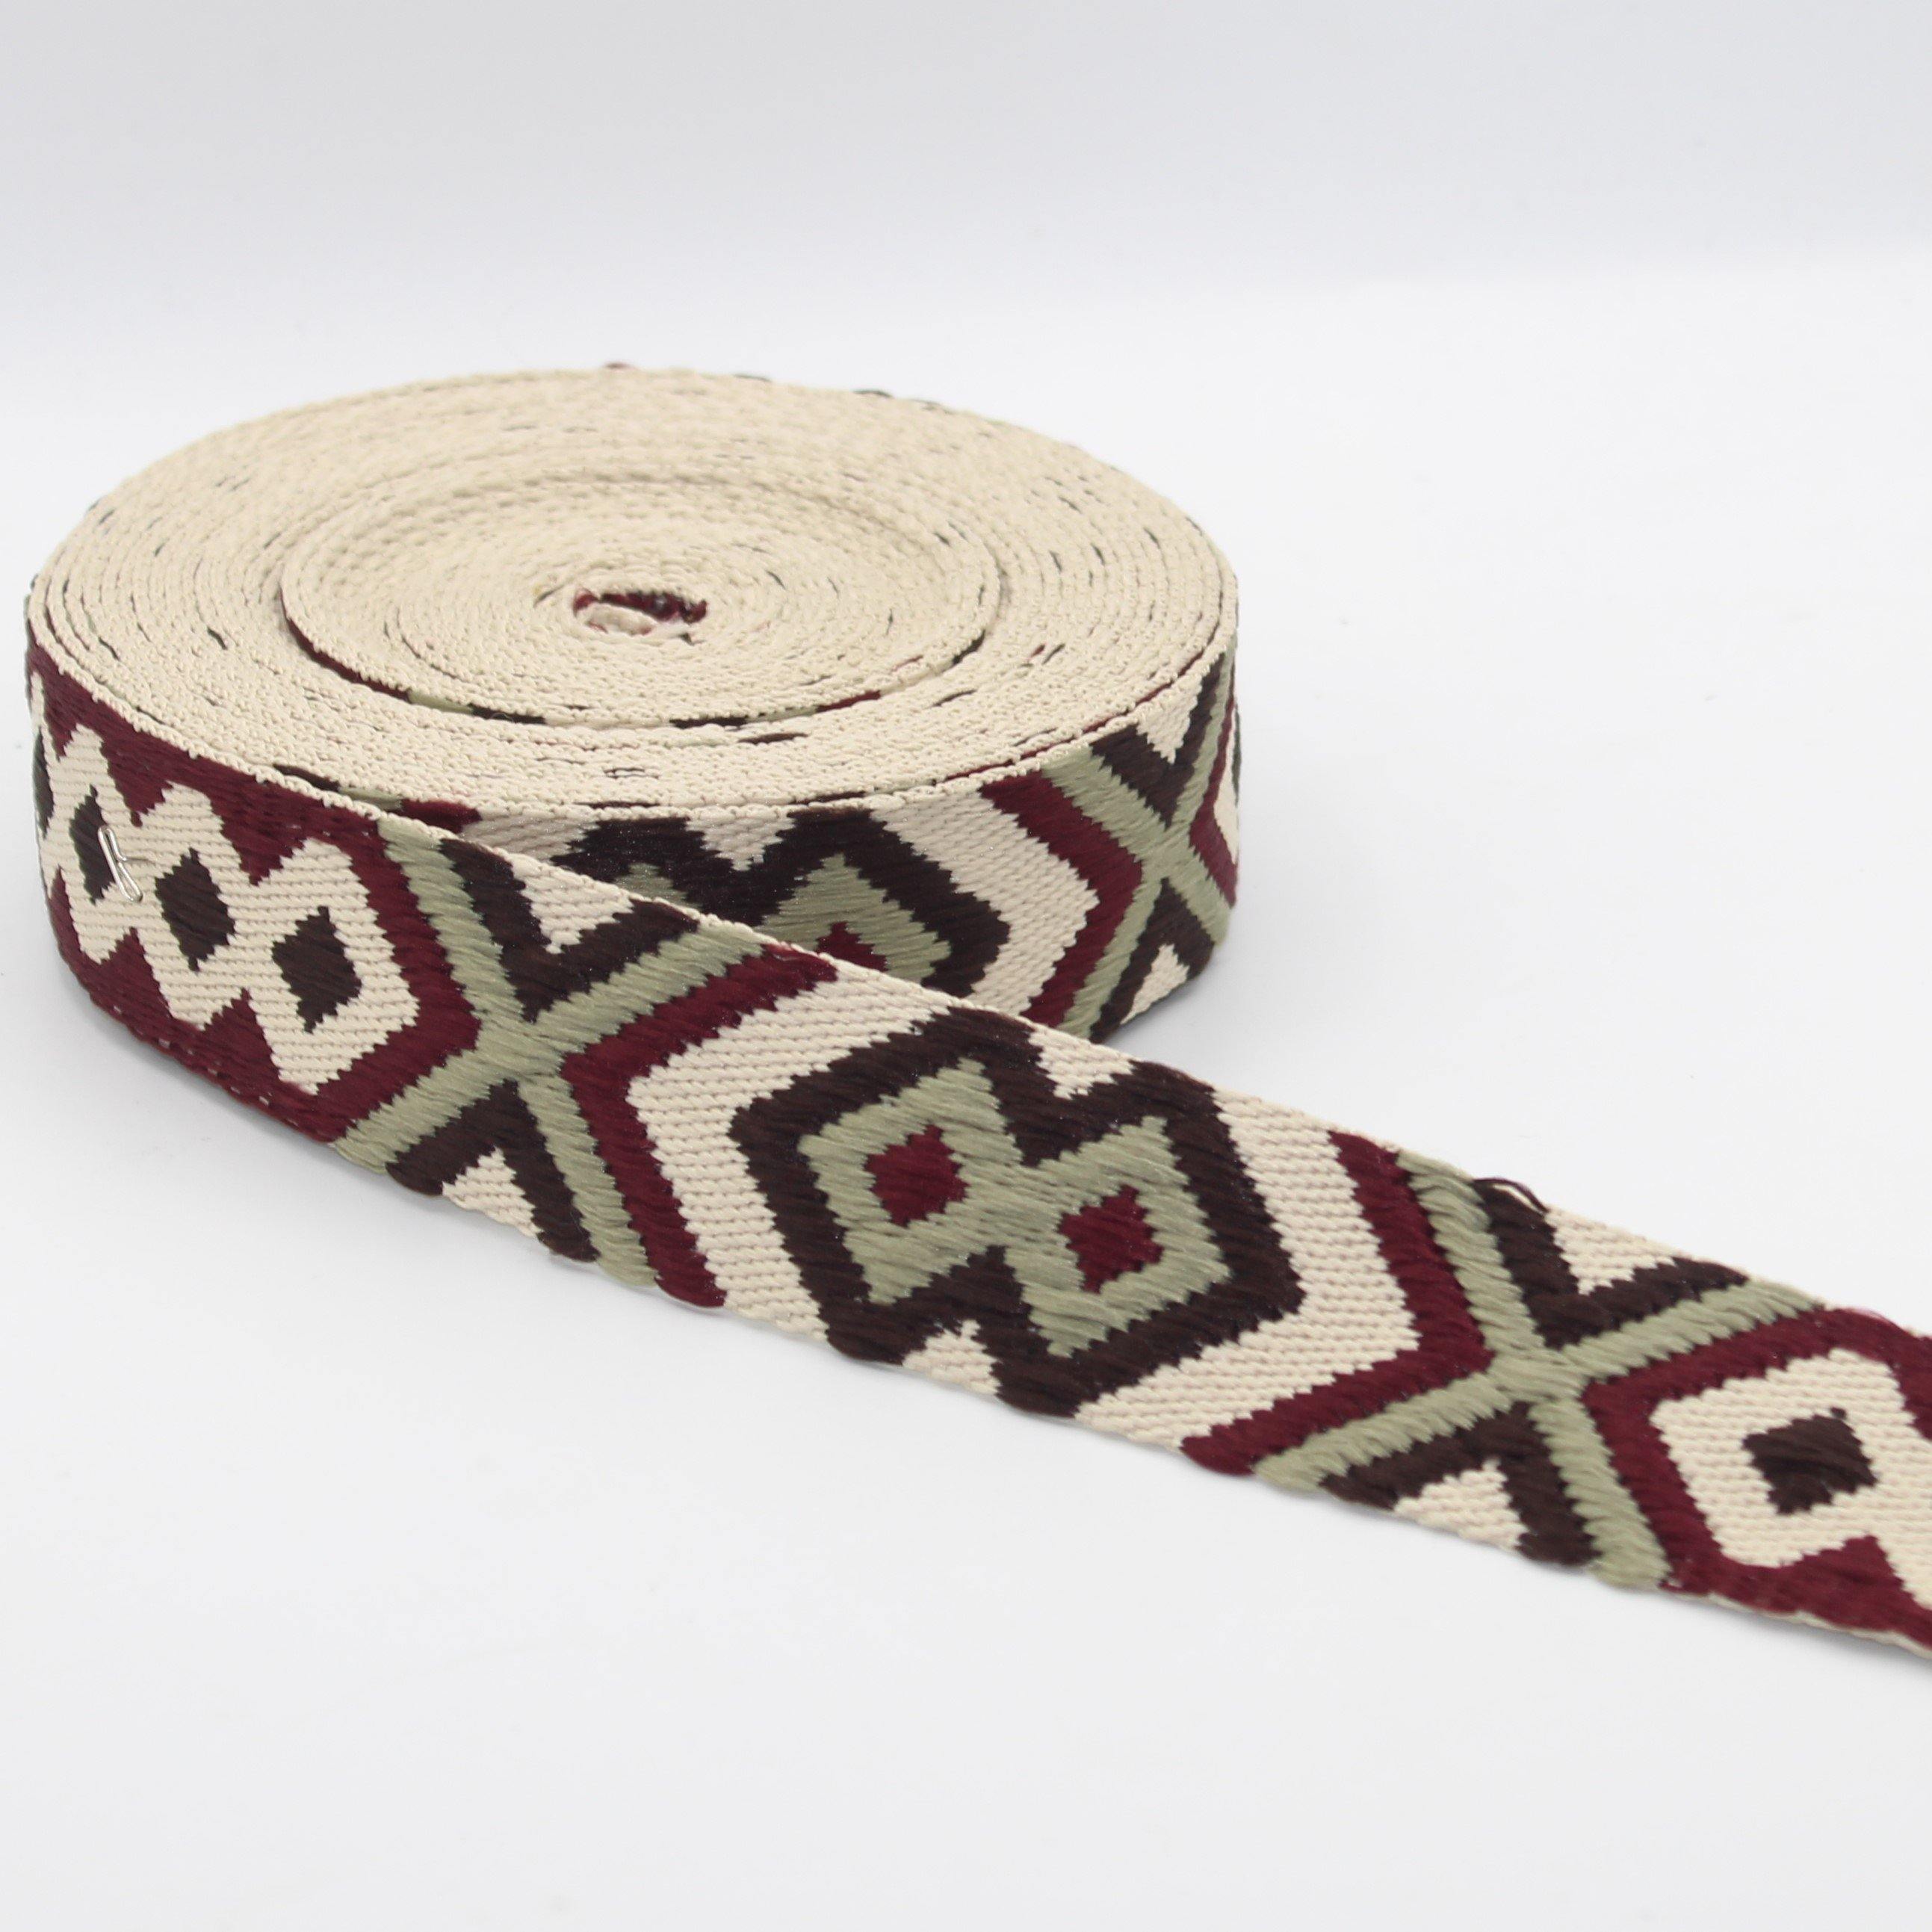 5 meters Thick Ethnic Webbing 38mm #RUB1974 - ACCESSOIRES LEDUC